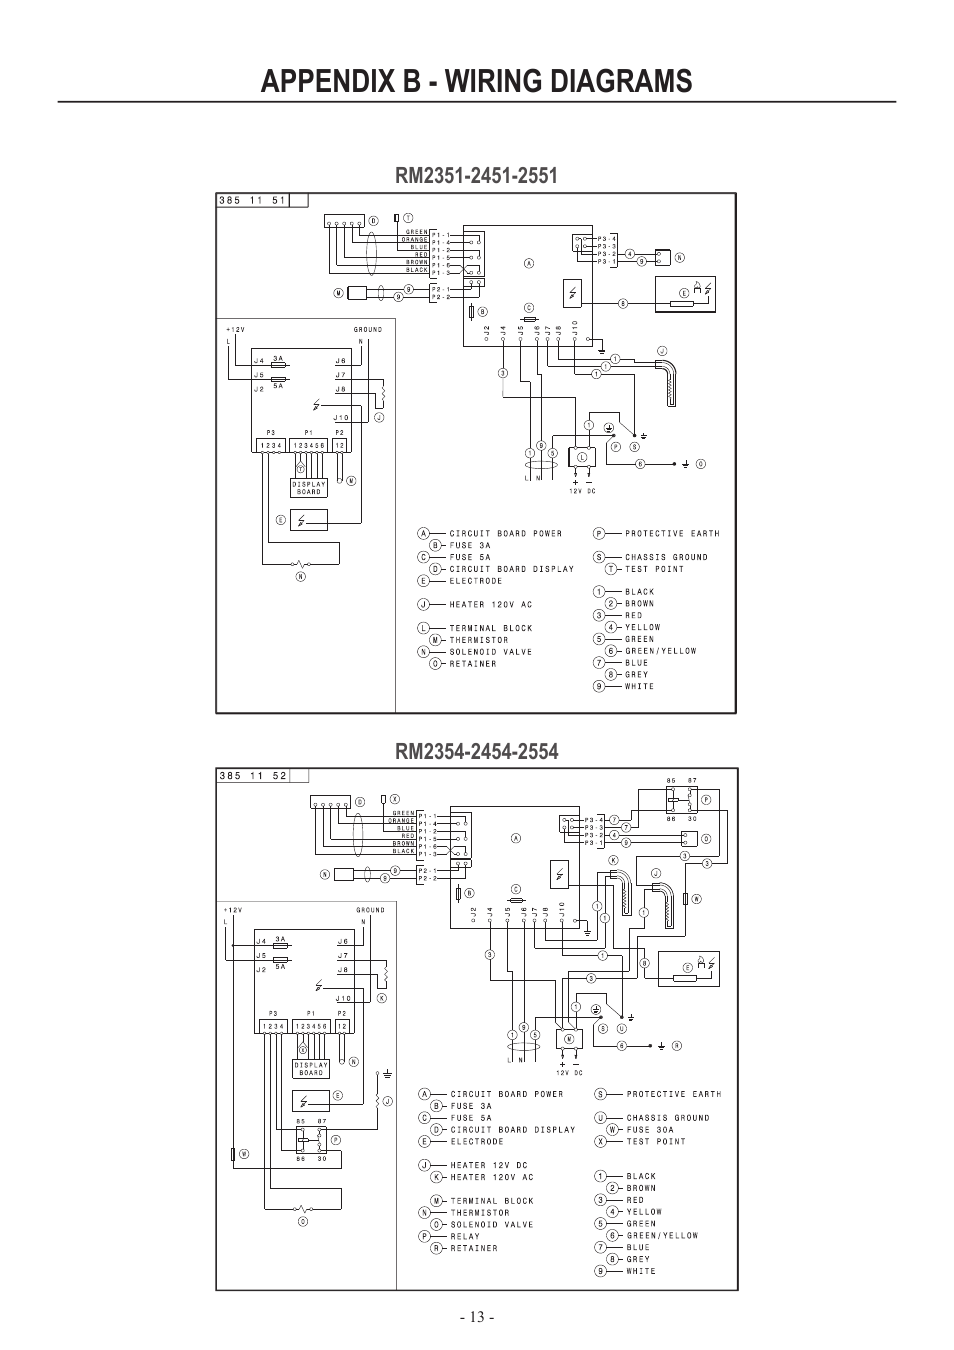 Appendix b - wiring diagrams | Dometic RM2852 User Manual | Page 13 / 16